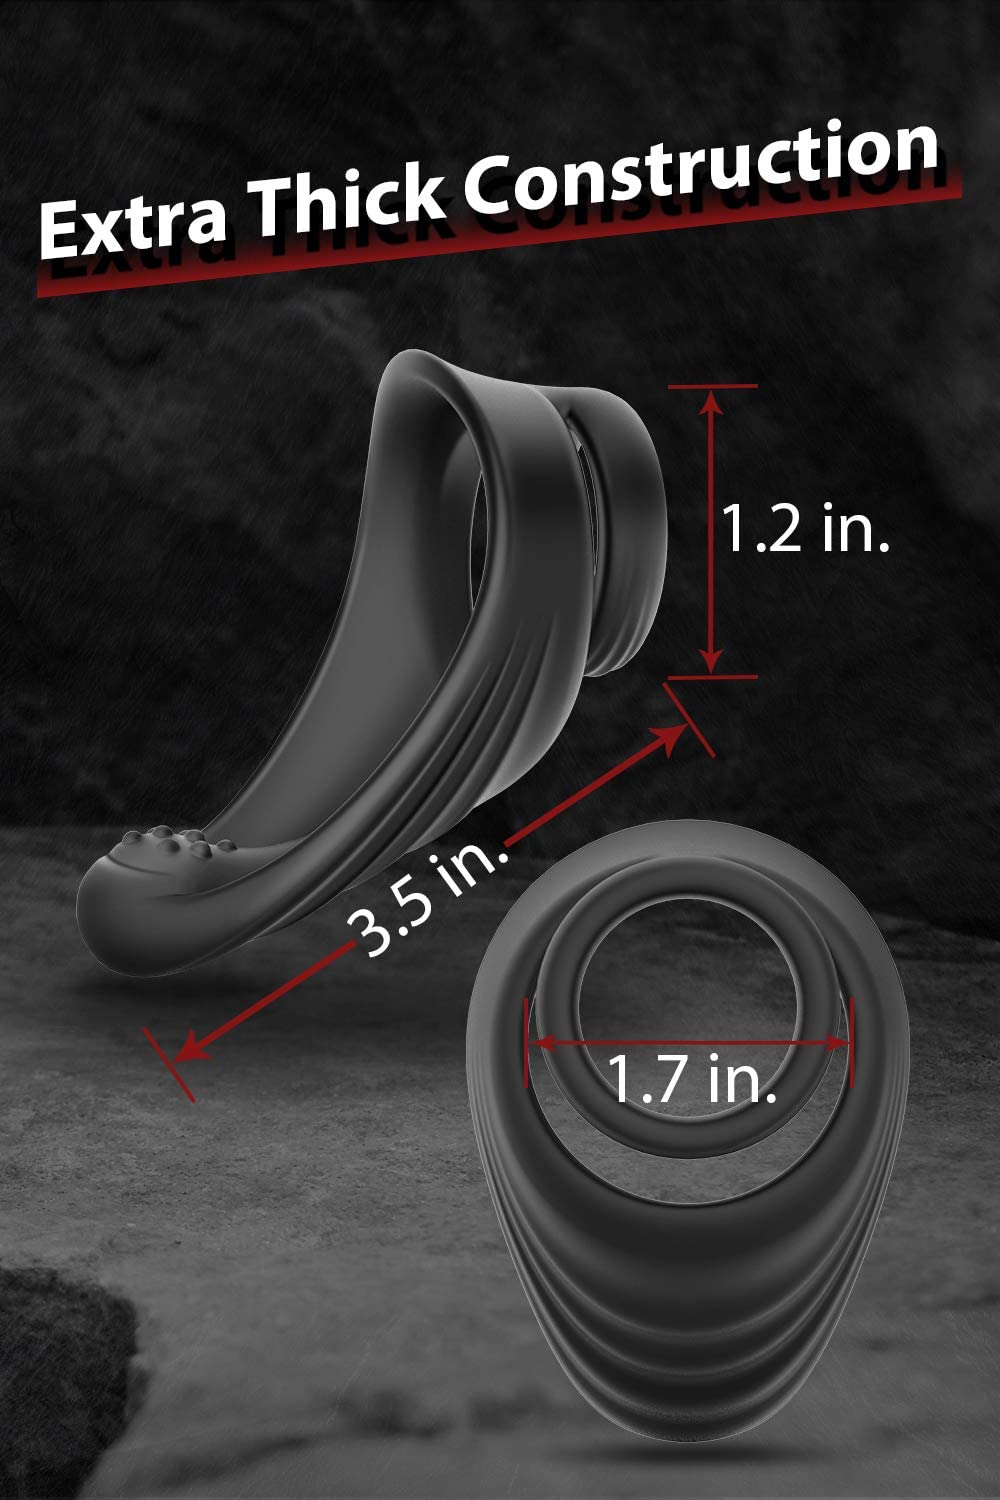 Silicone Dual Penis Ring with Taint Teaser, Premium Stretchy Cock Ring Longer Harder Stronger Erection Enhancing Sex Toys for Male and Couples Play (Taint)